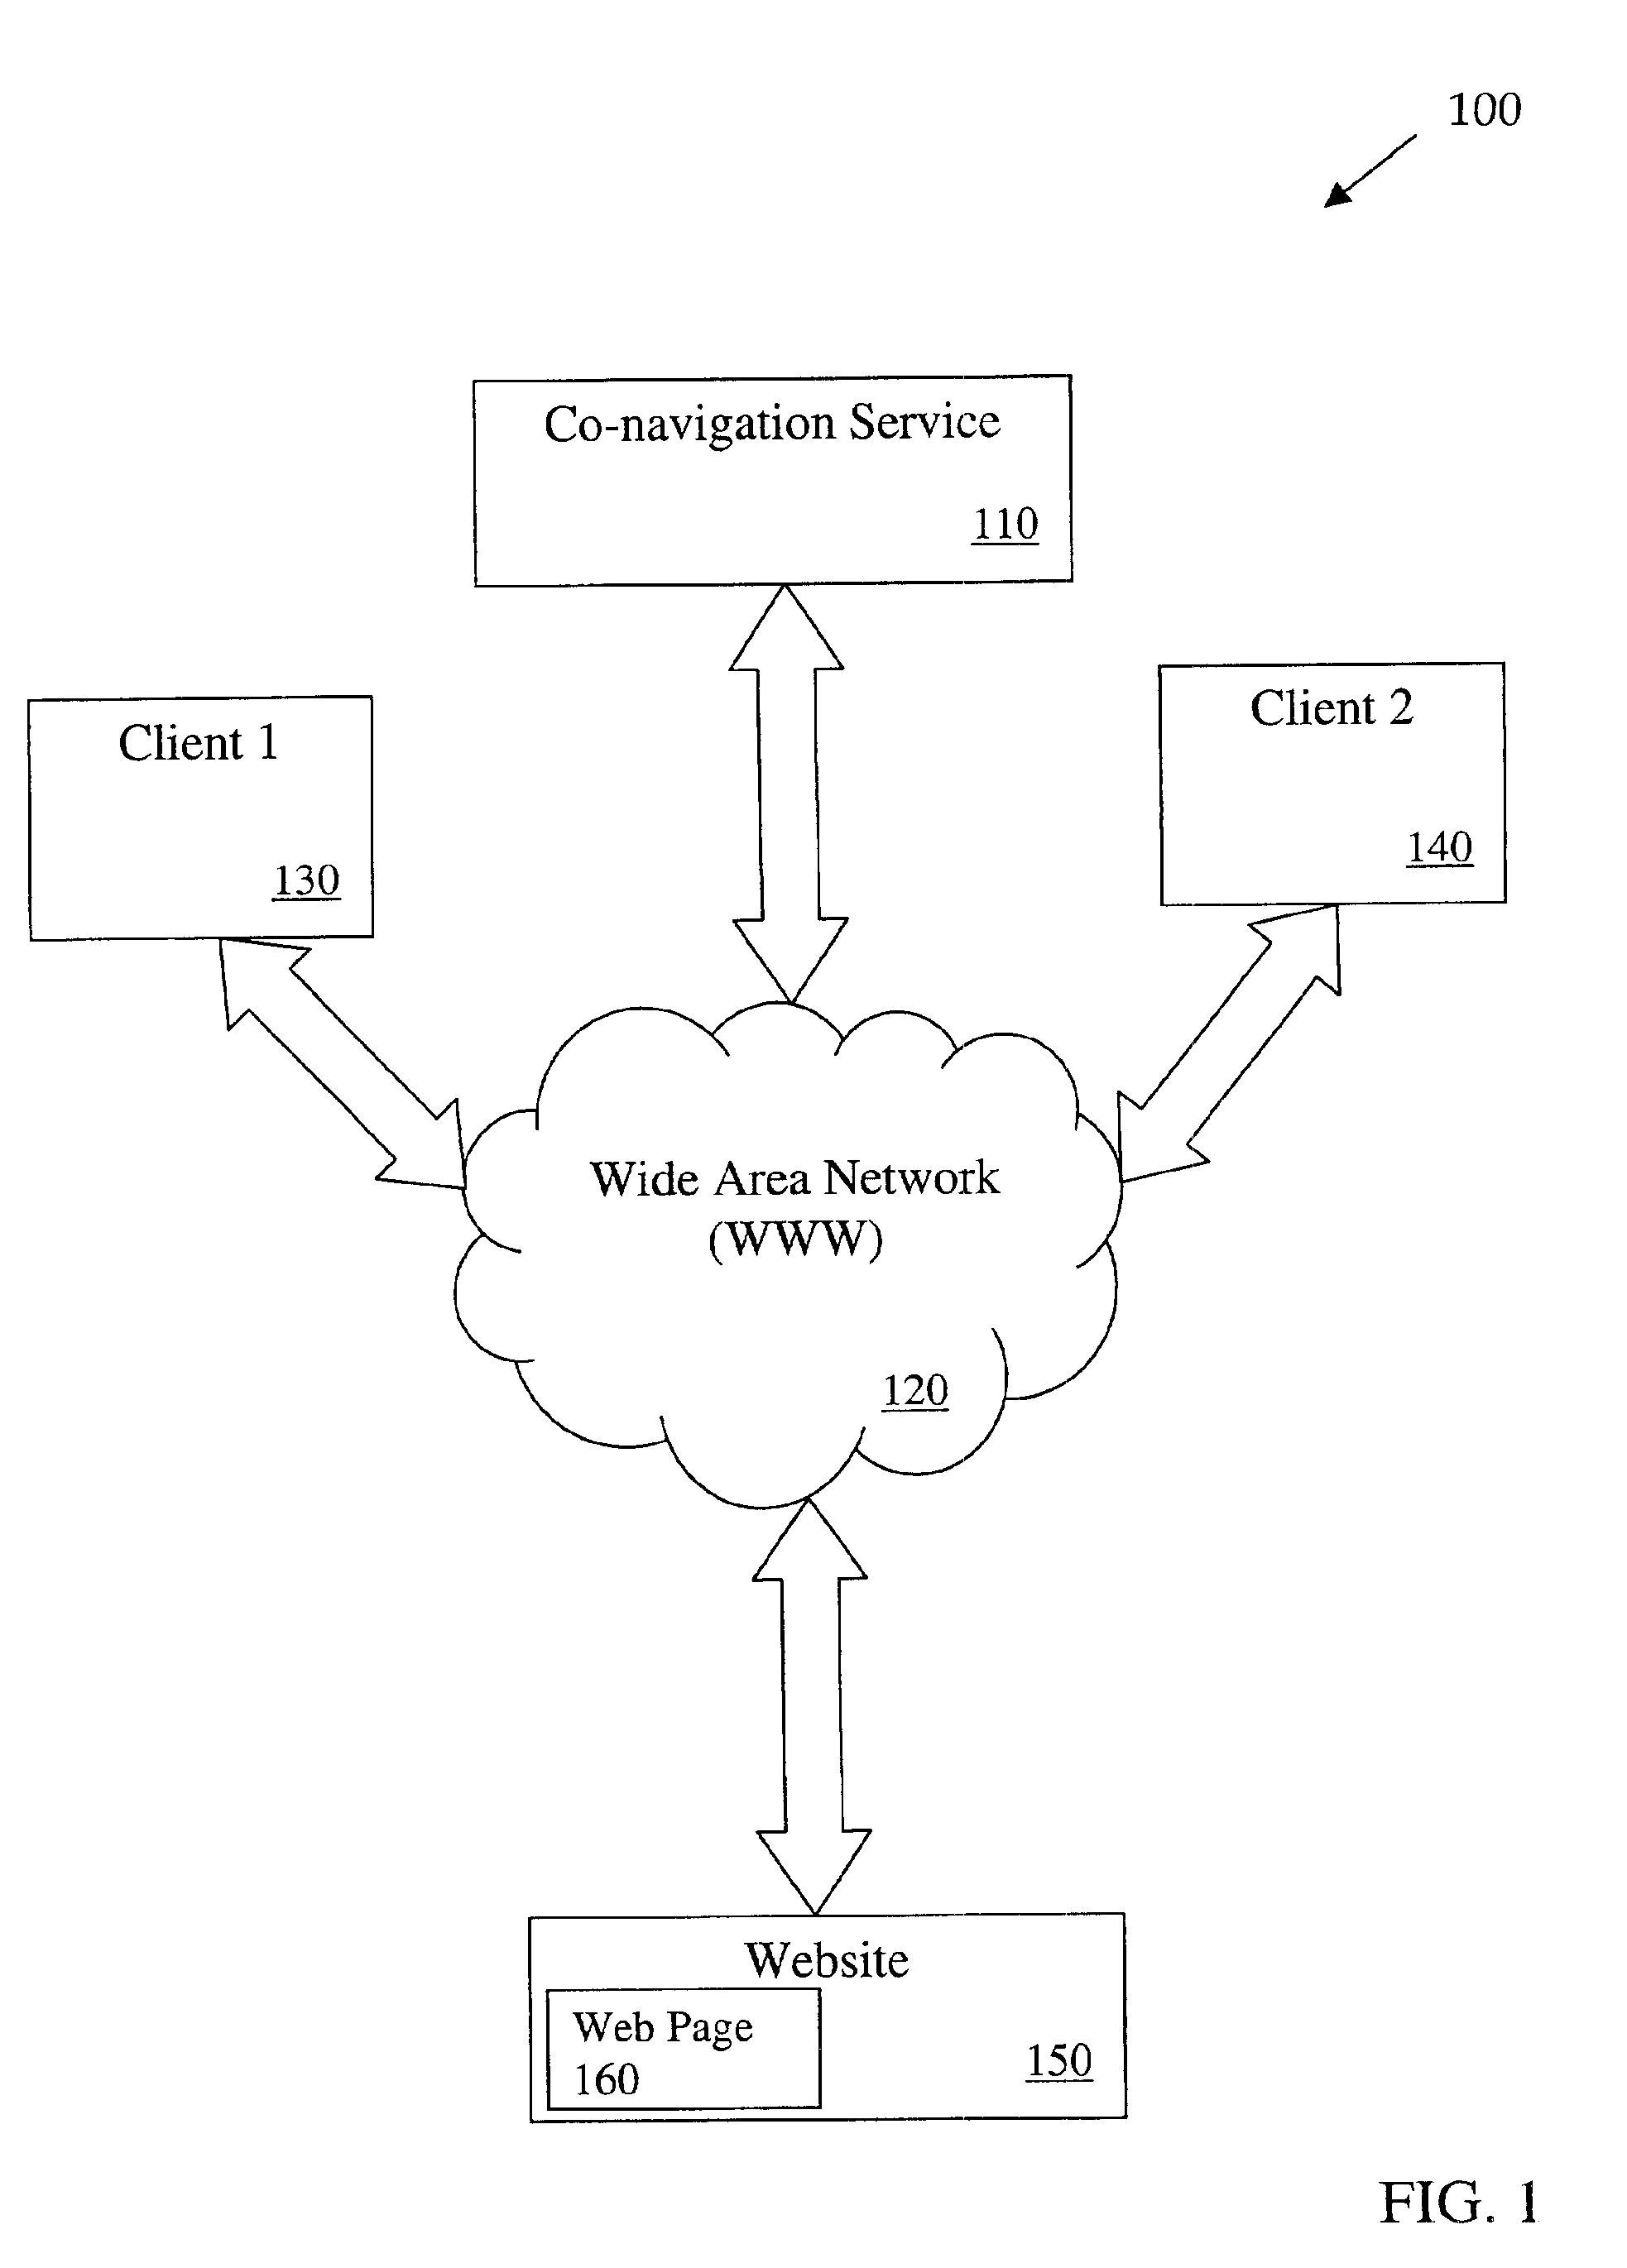 System and method for web co-navigation with dynamic content including incorporation of business rule into web document